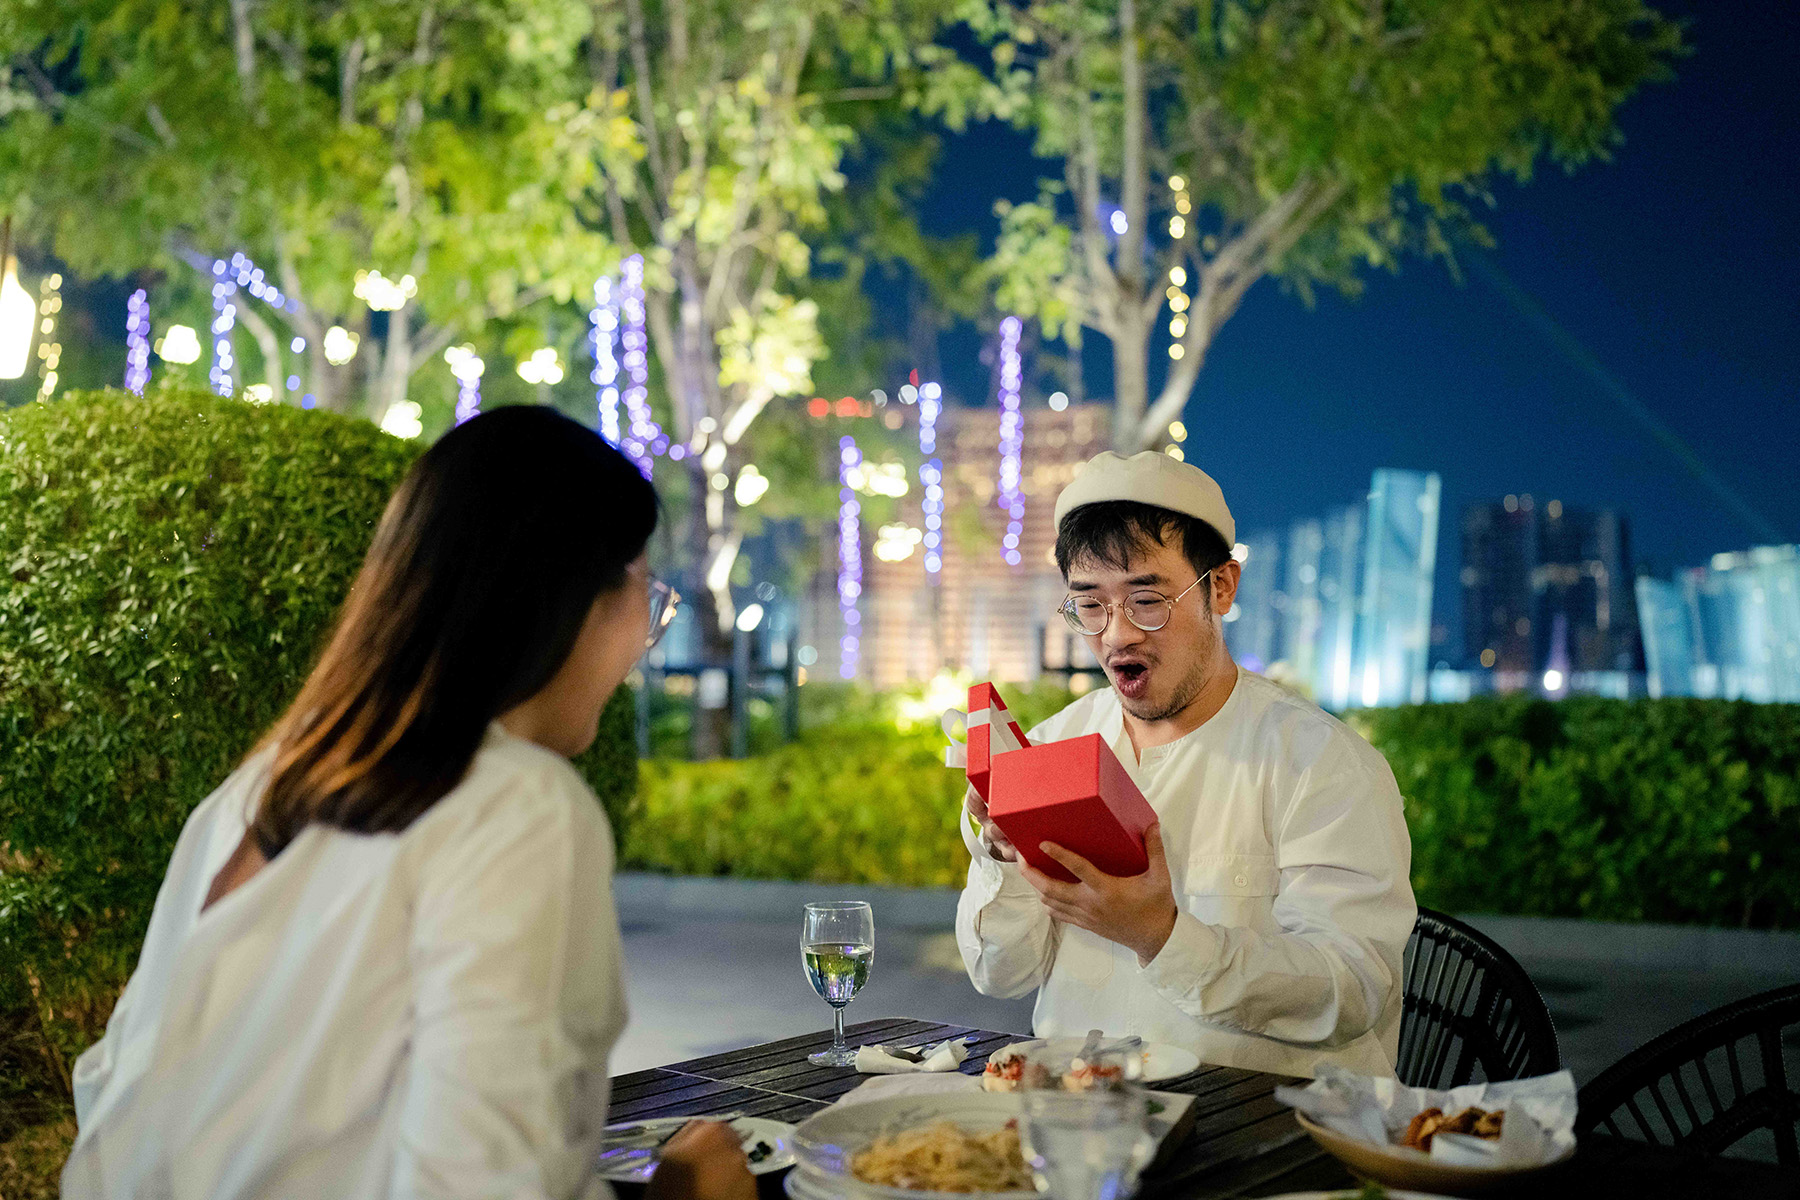 A young guy smiles surprised as he opens a gift in a red box while sitting in a restaurant with his girlfriend

